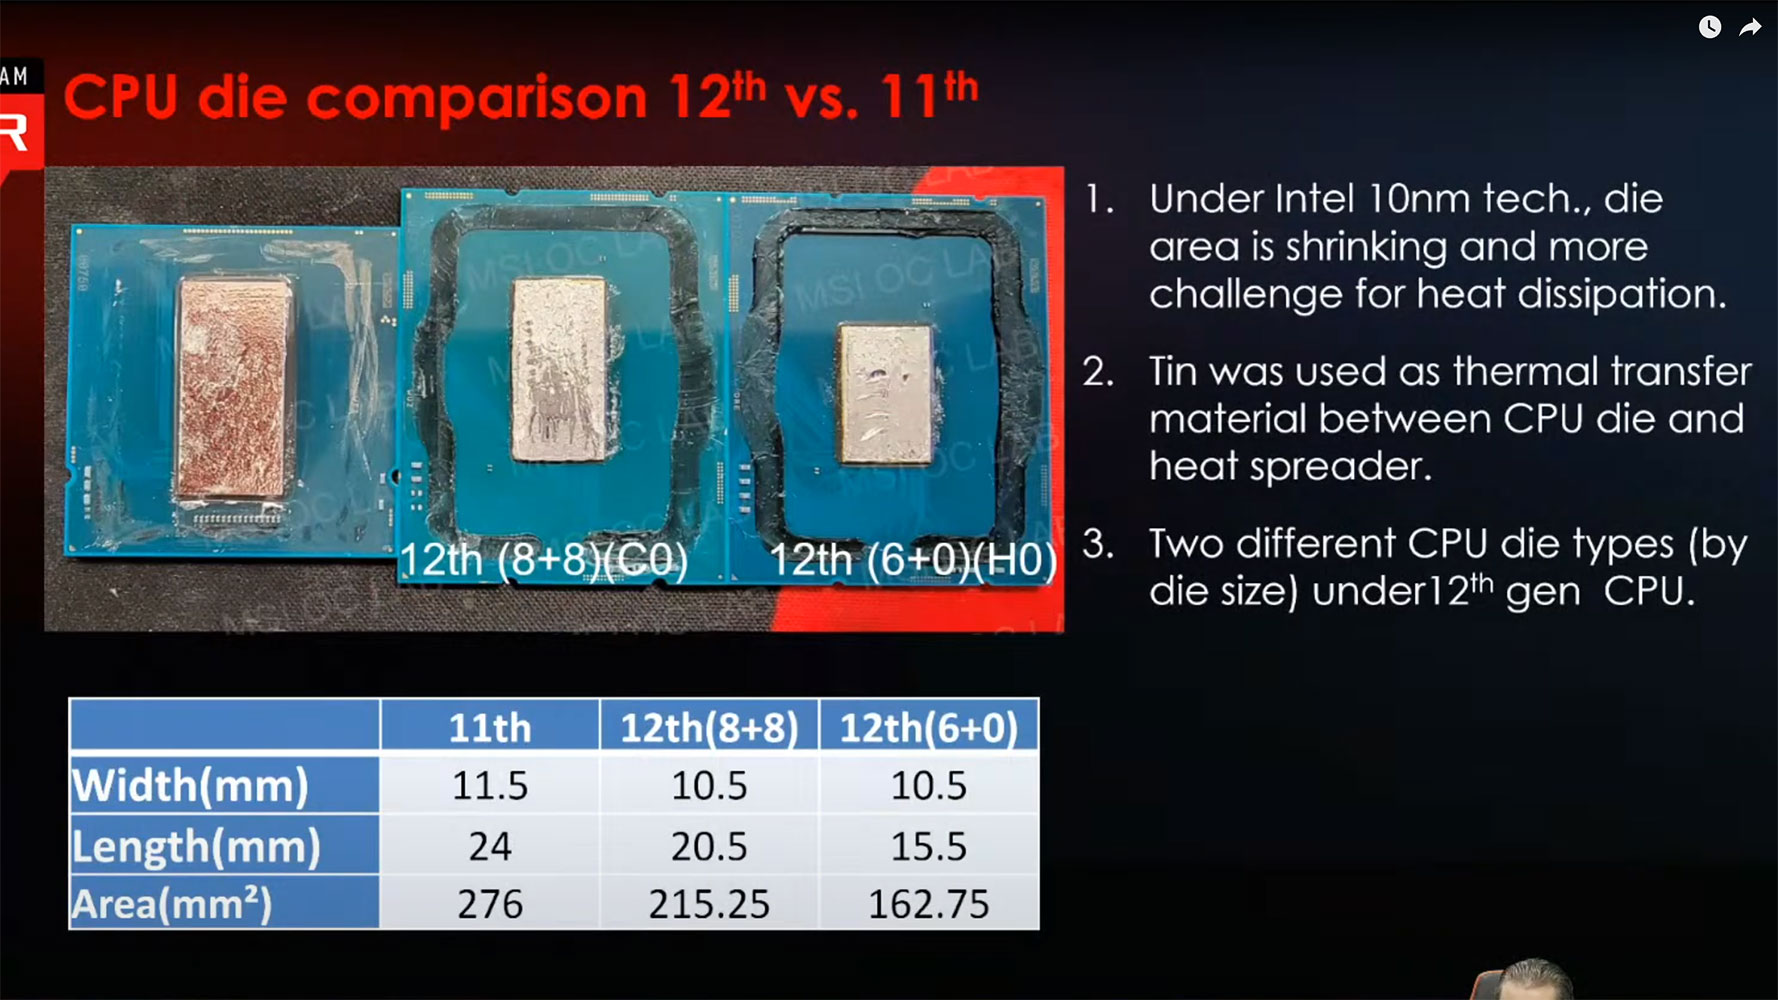 Intel Core i3-12100F Review - 5.2 GHz OC with an Asterisk